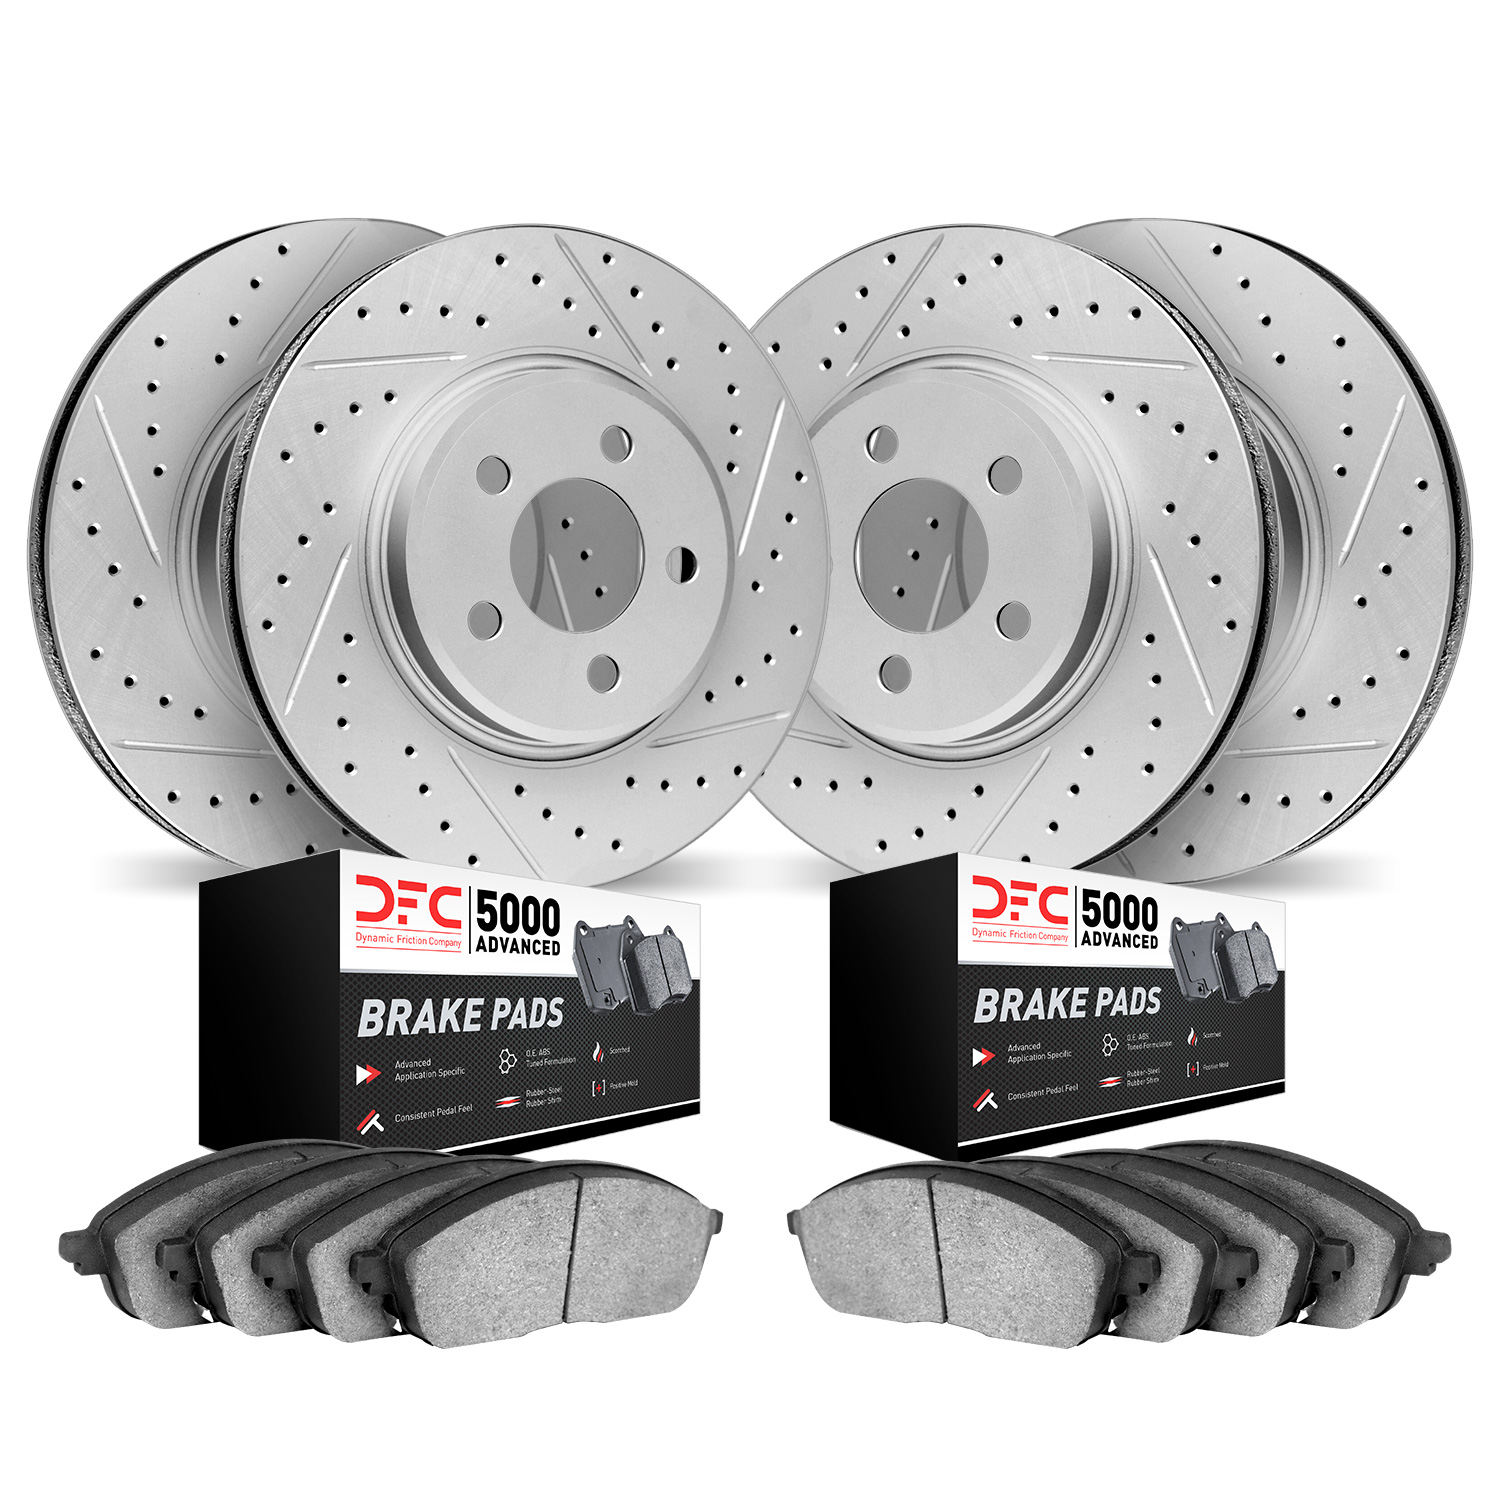 2504-54214 Geoperformance Drilled/Slotted Rotors w/5000 Advanced Brake Pads Kit, 2013-2014 Ford/Lincoln/Mercury/Mazda, Position: